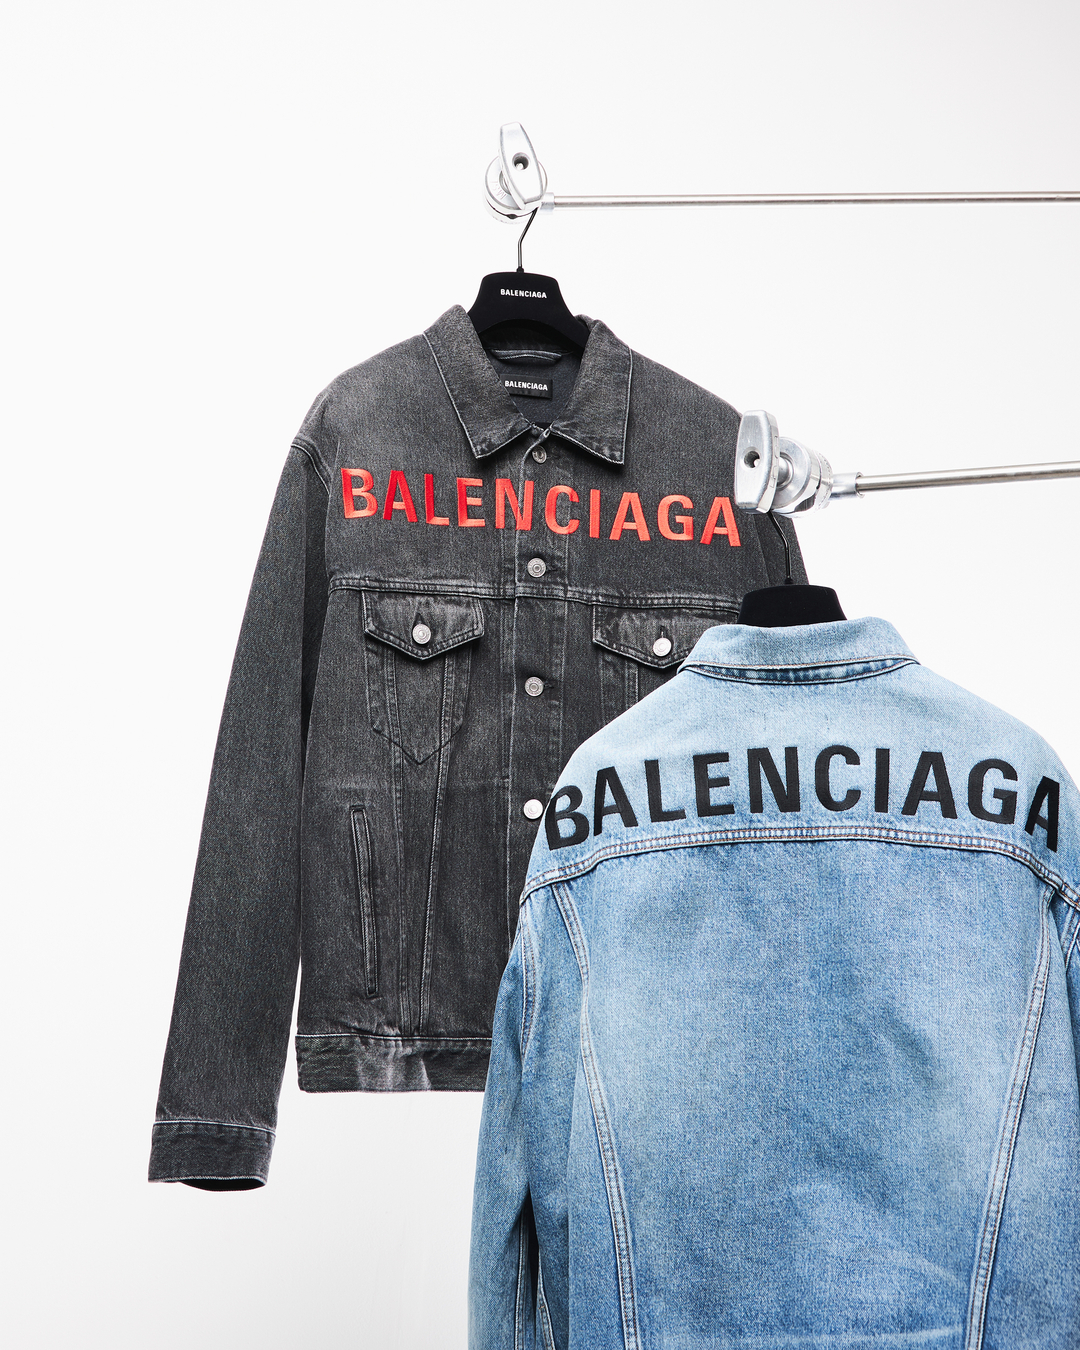 gips detektor modvirke END. on X: "The @balenciaga Embroidered Back Logo Denim Jacket, available  in selected stores (Newcastle &amp; Glasgow) this weekend. #balenciaga  https://t.co/YCBOpSjTcB" / X